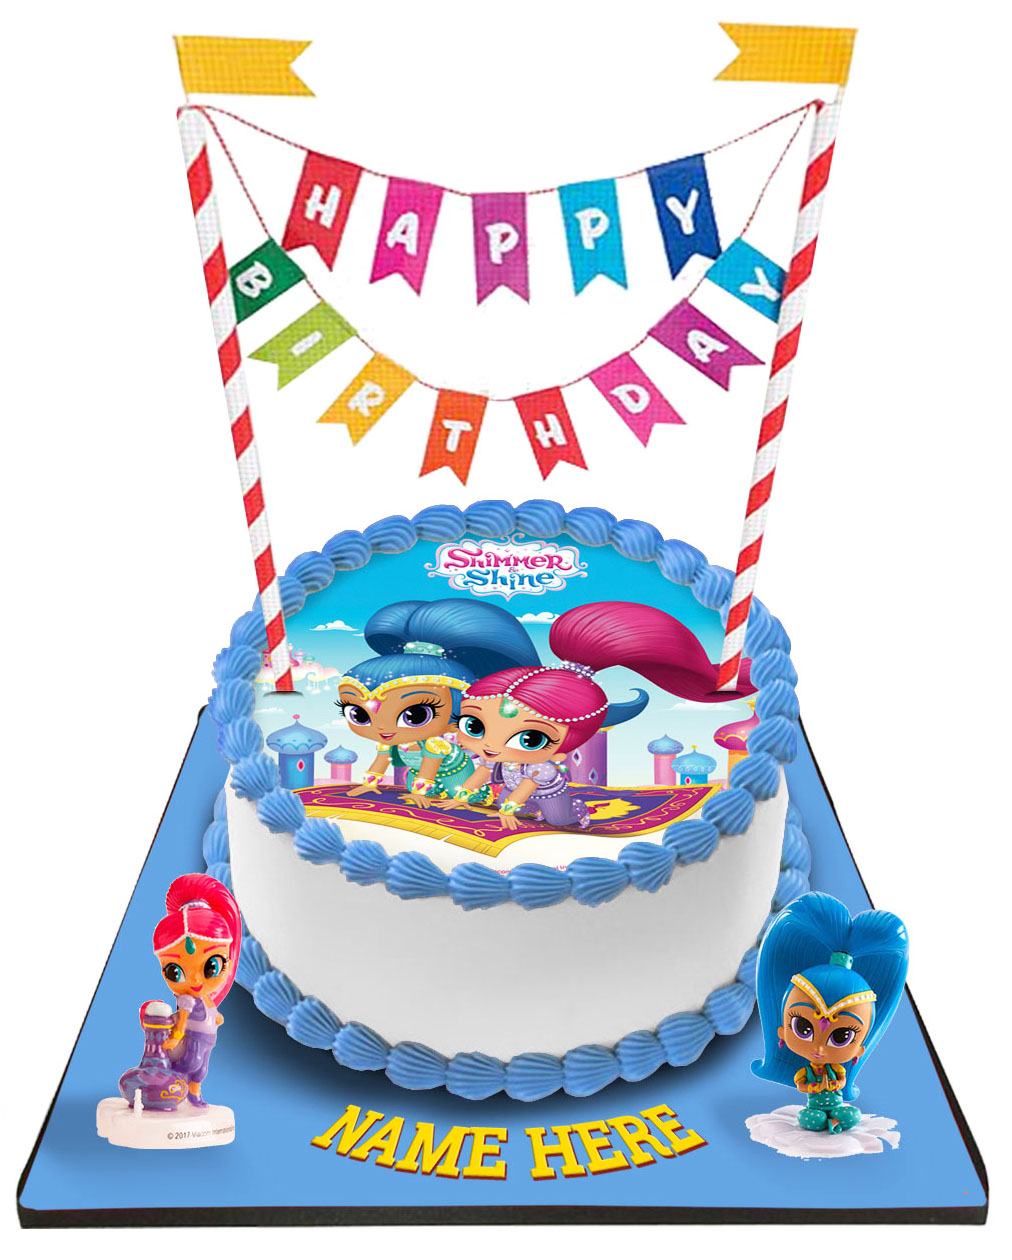 Shimmer & Shine Cake with Happy Birthday Bunting & Toppers